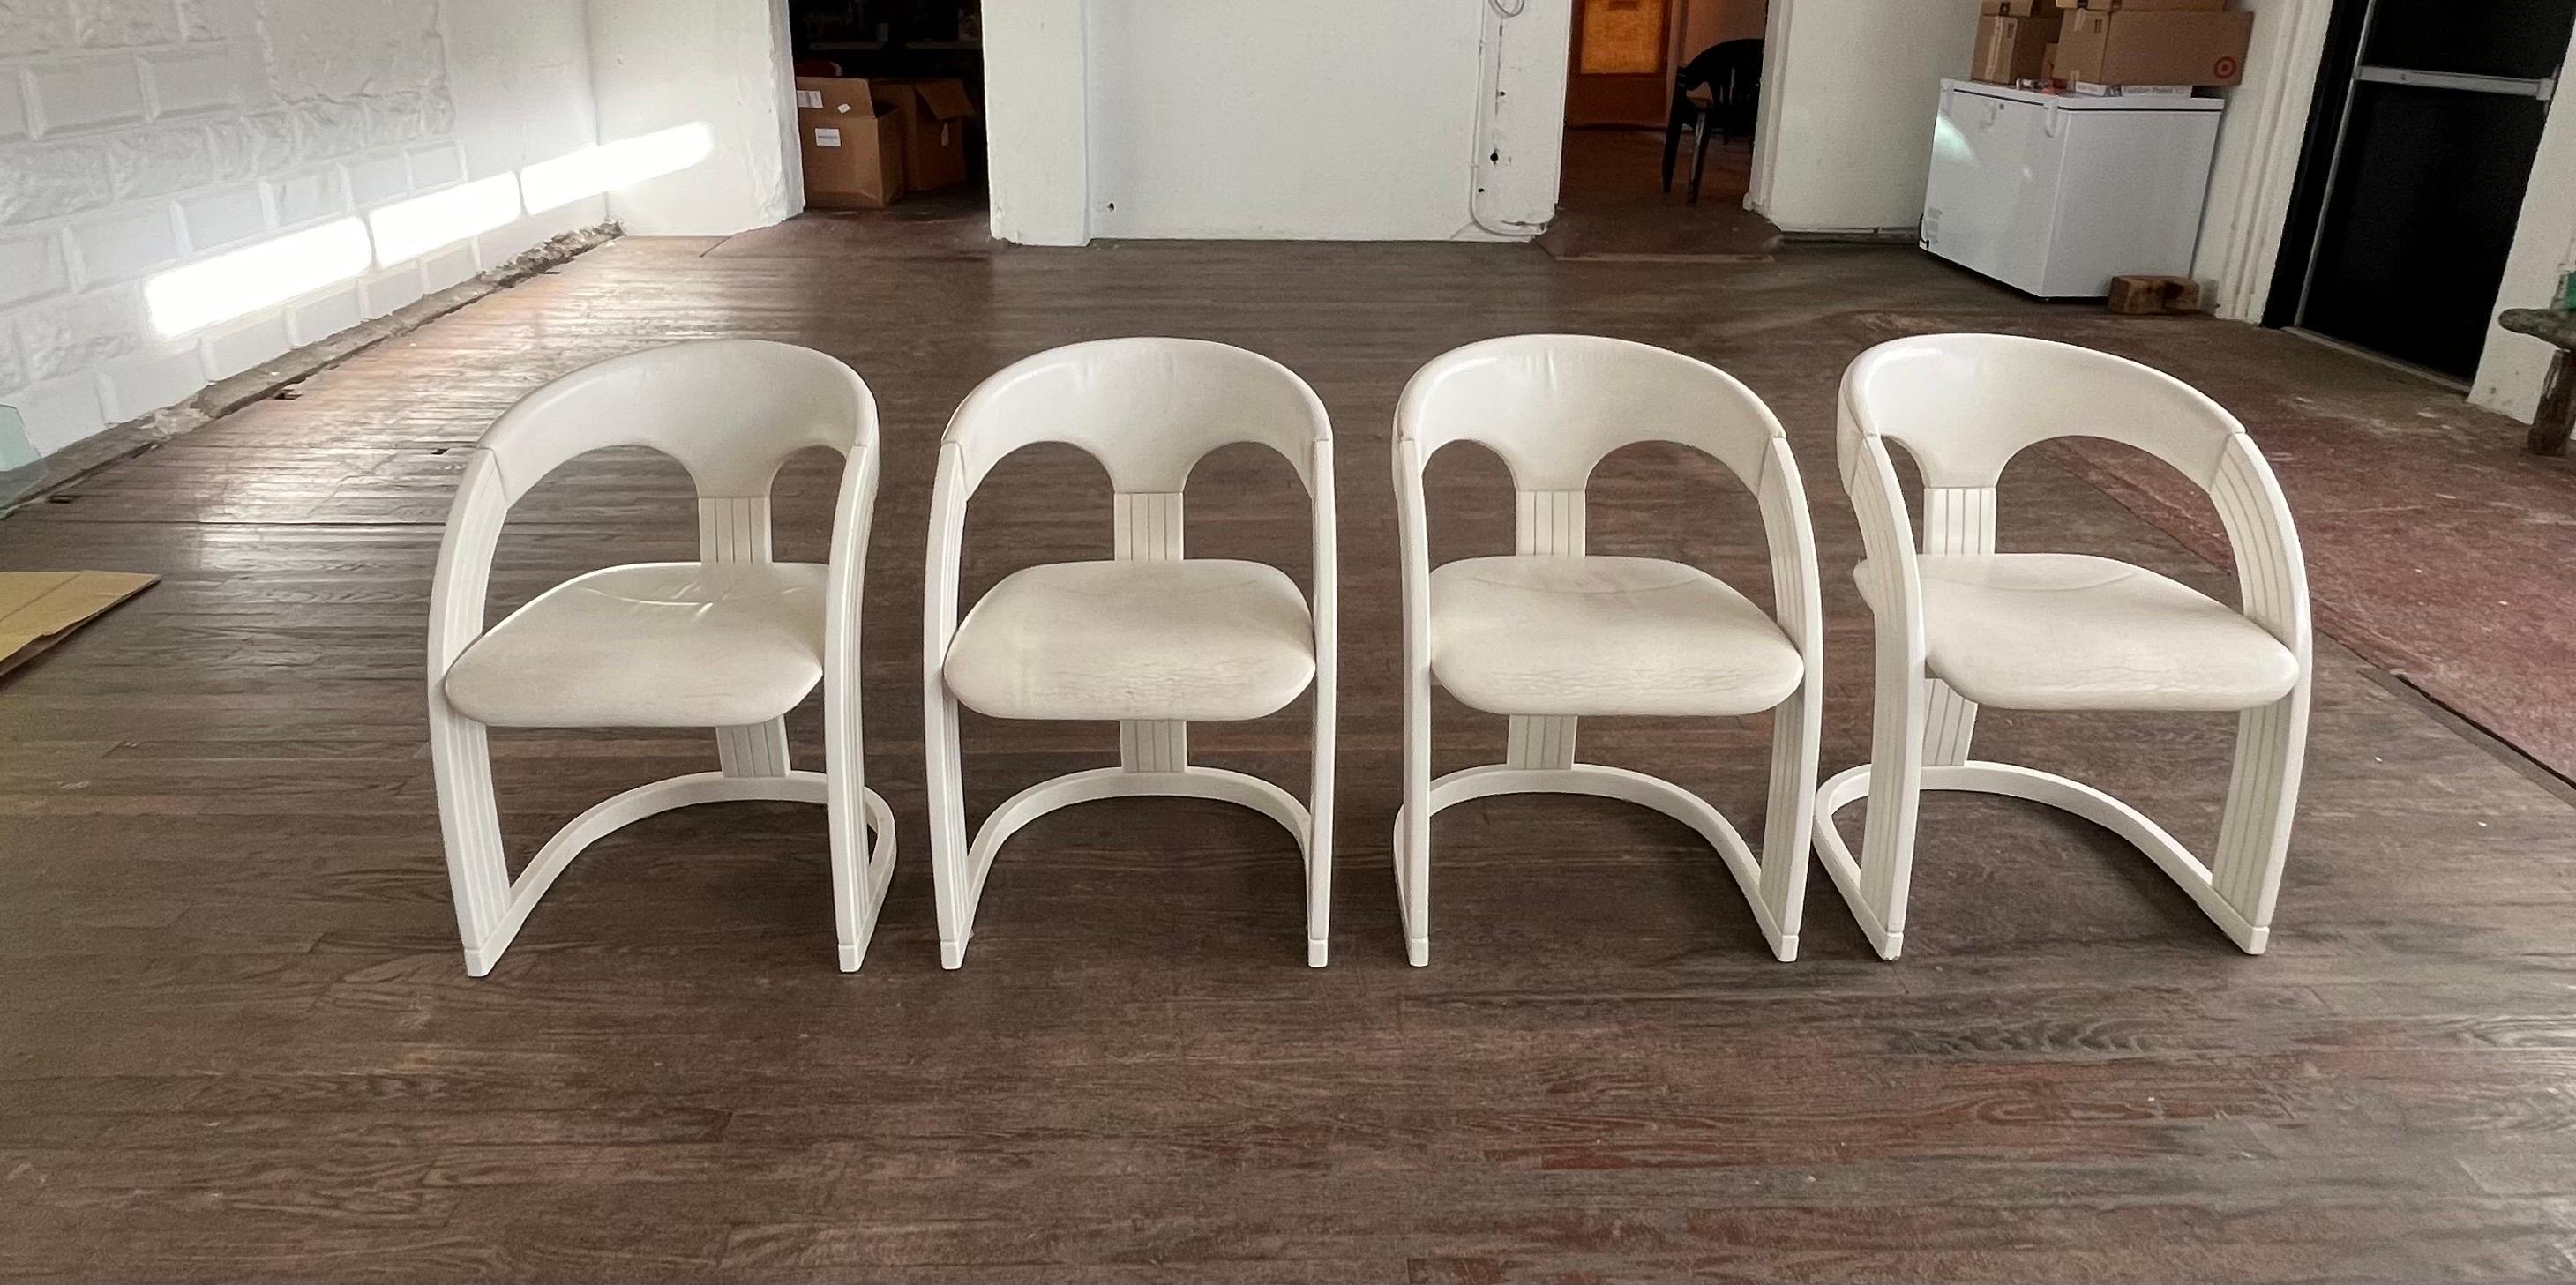 Set of 4 Italian Lacquer dining chairs with leather upholstery. Gentle curved design with channel grooves on sides. Labeled made in Italy. Leather shows wear. 
Curbside to NYC/Philly $300